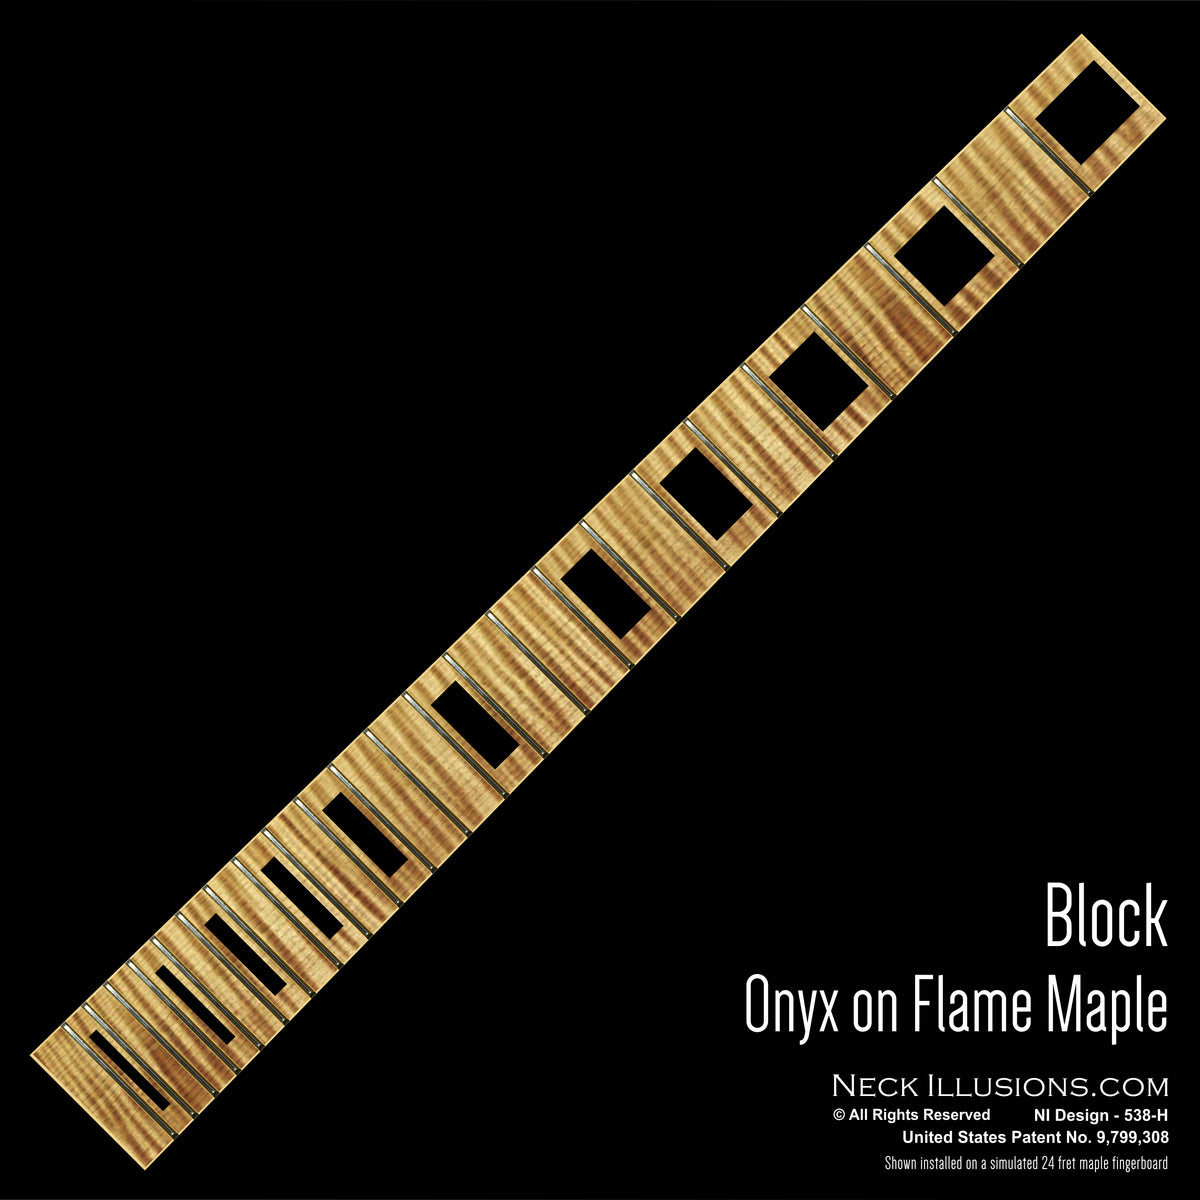 Block on Flame Maple